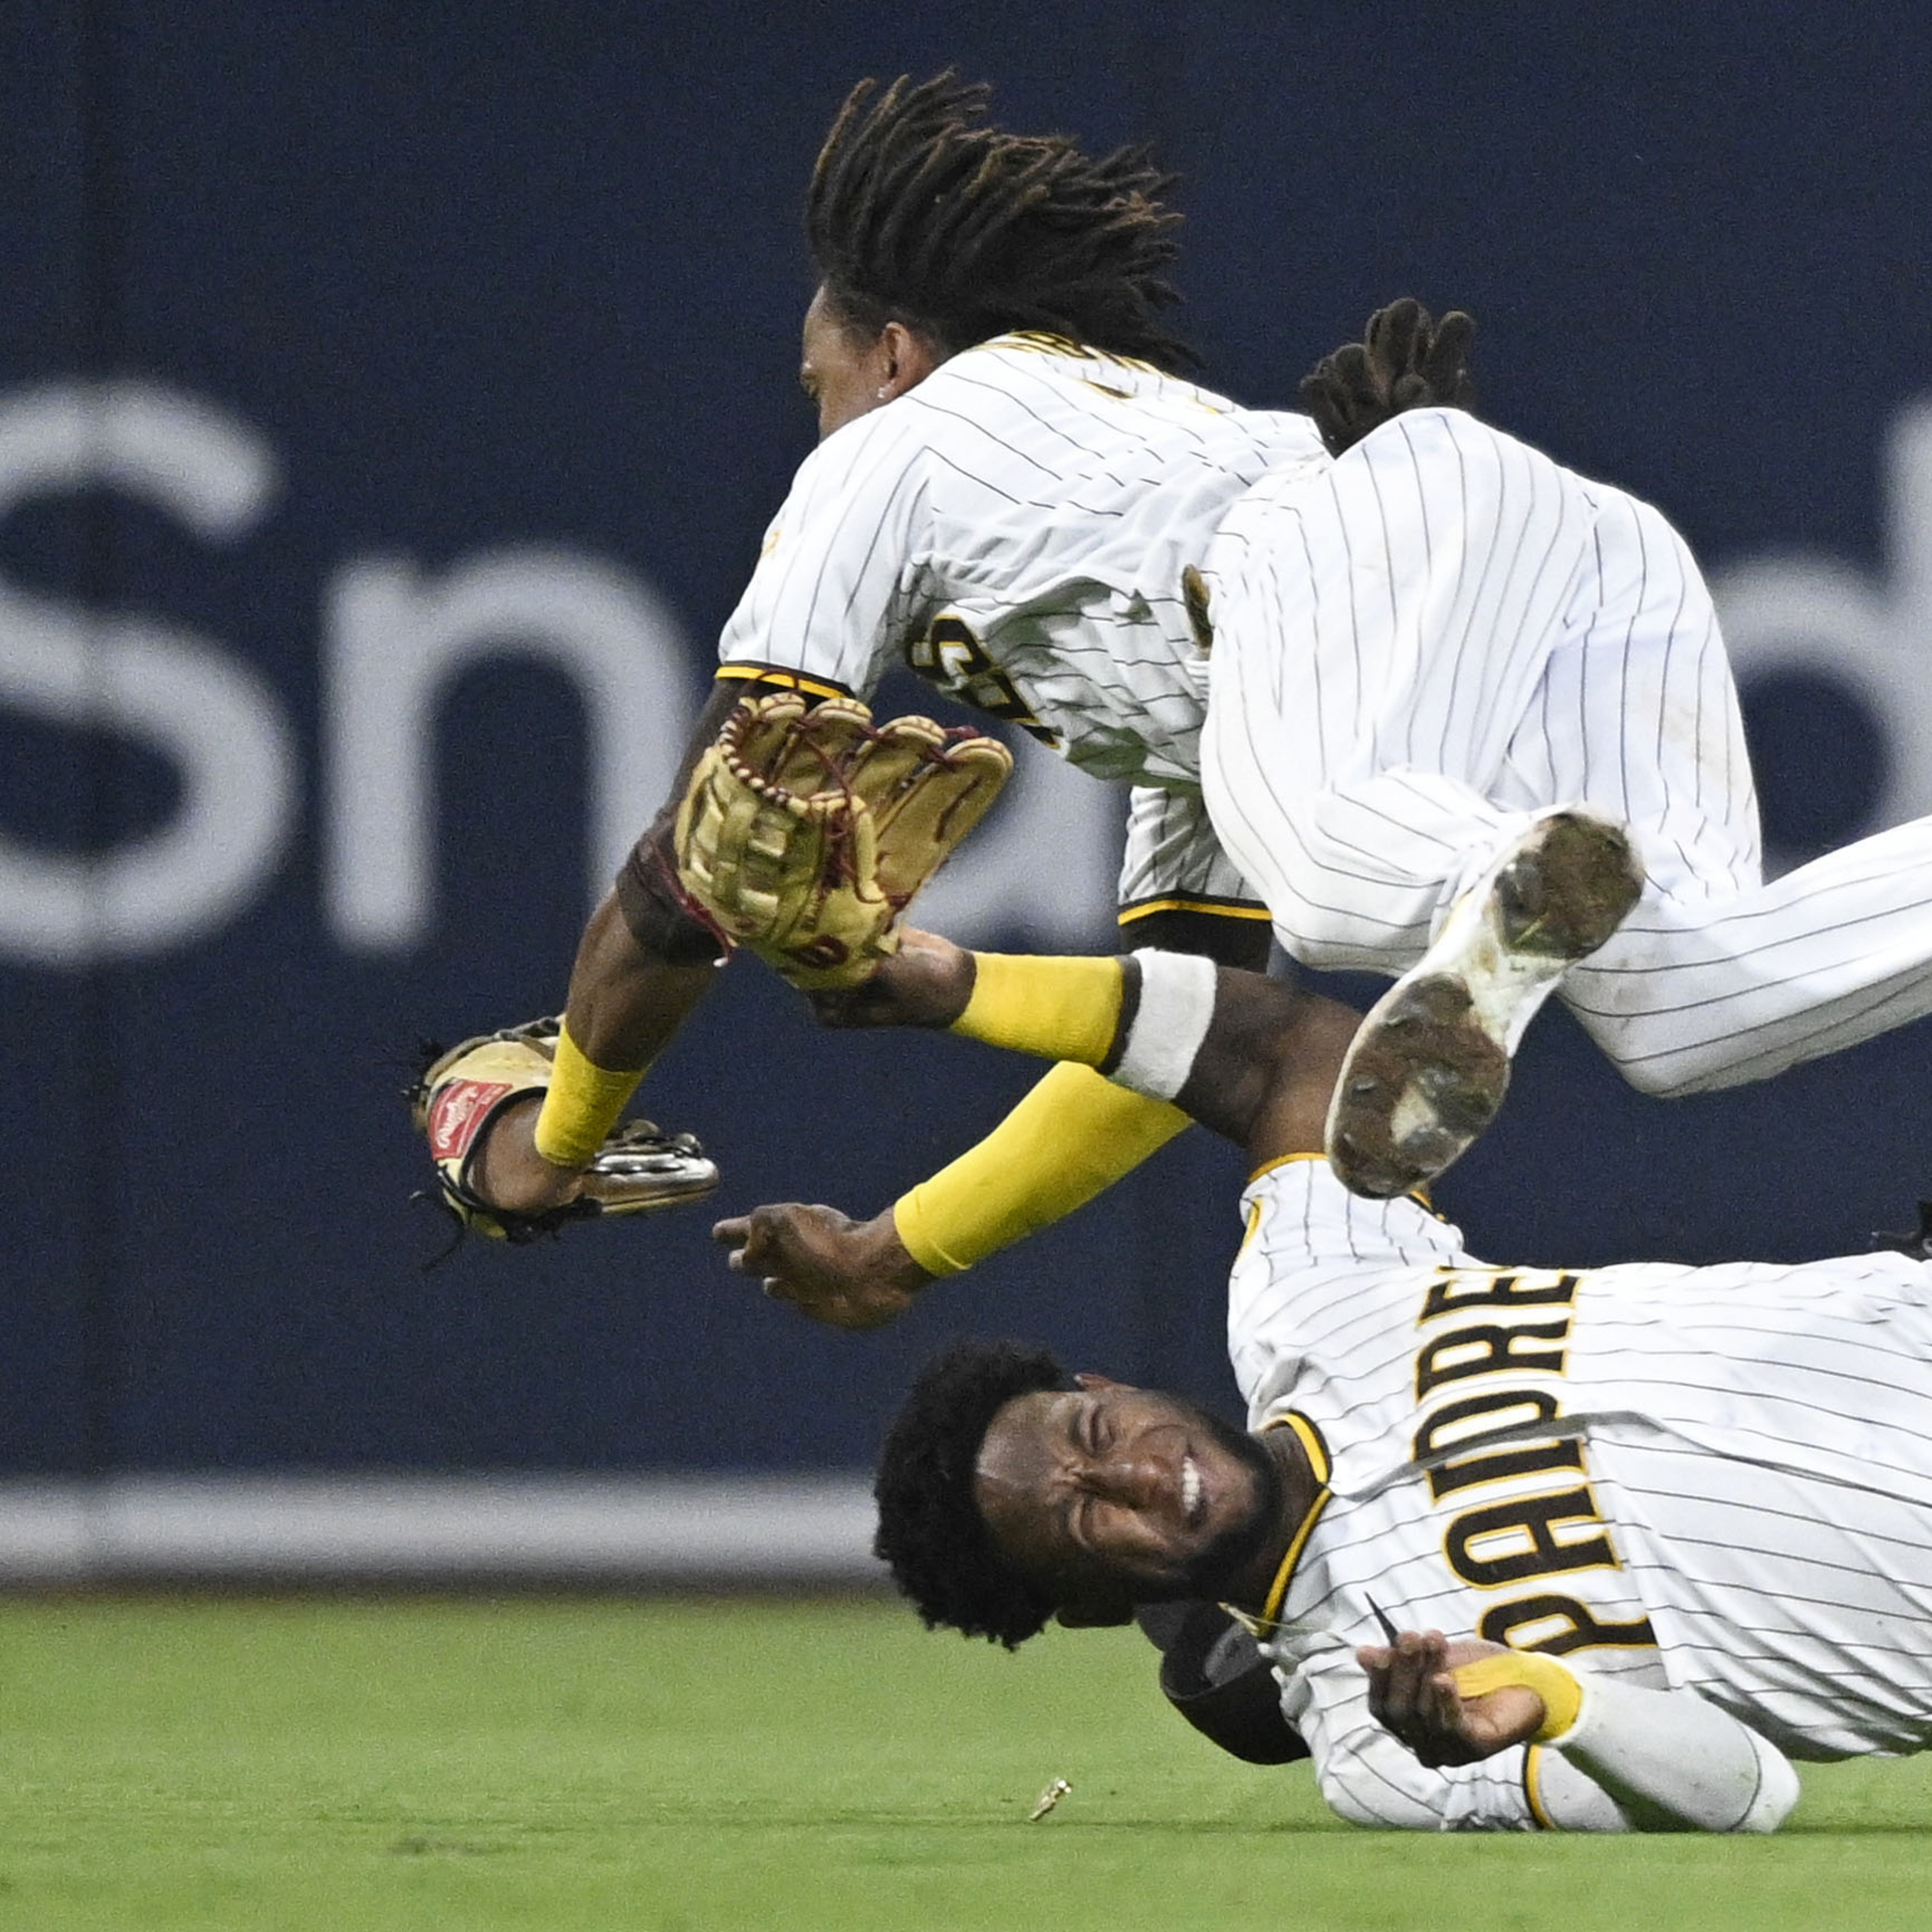 Padres' Jurickson Profar Diagnosed with Concussion, Neck Injury After Scary Coll..